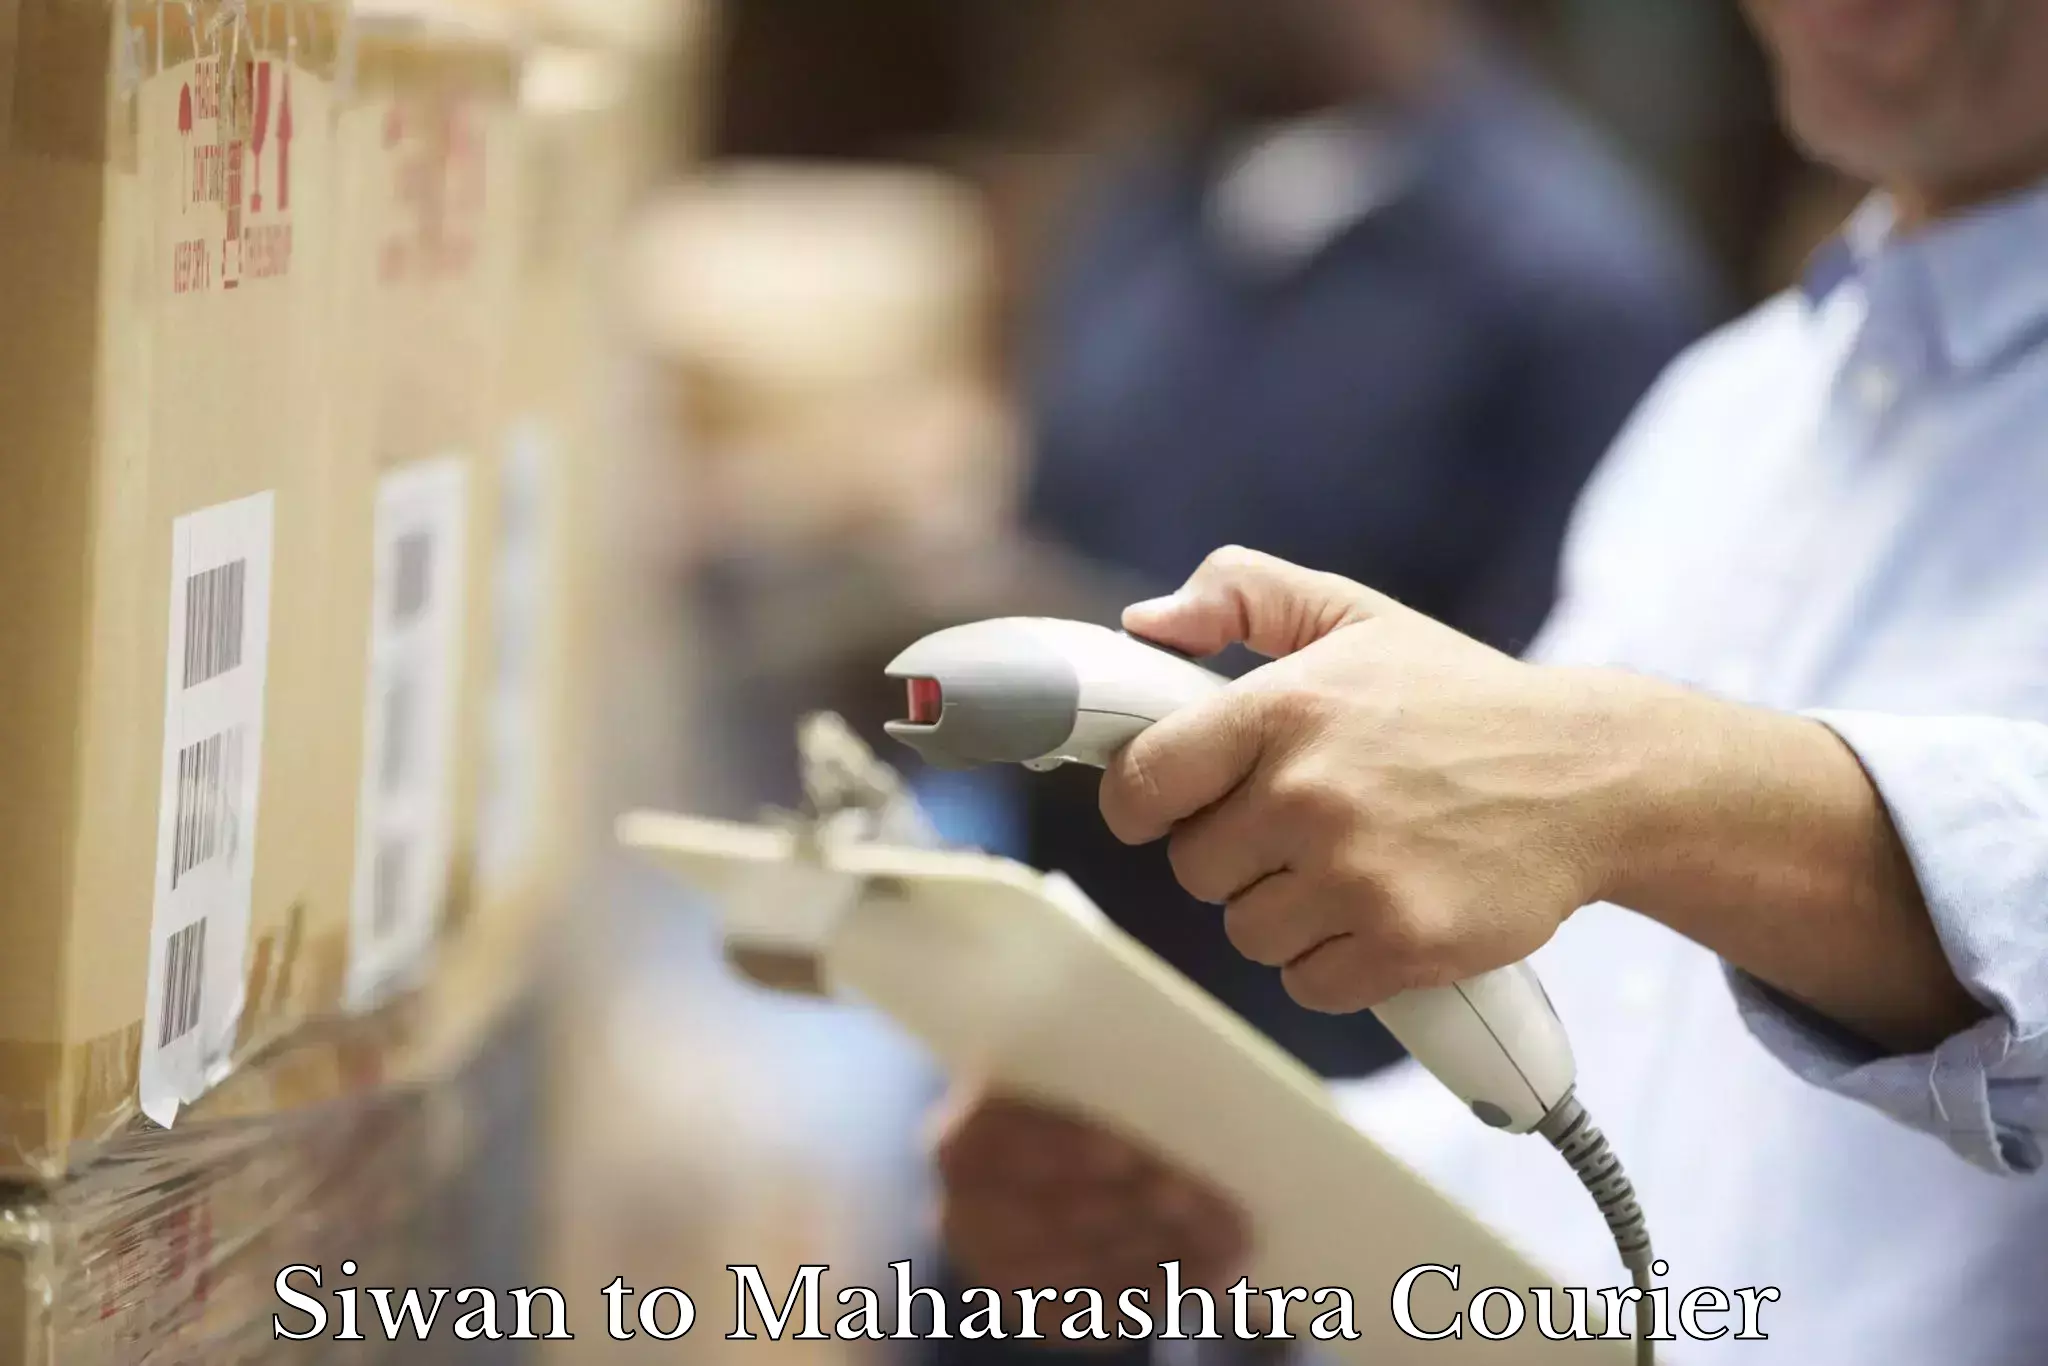 Global courier networks Siwan to Maharashtra